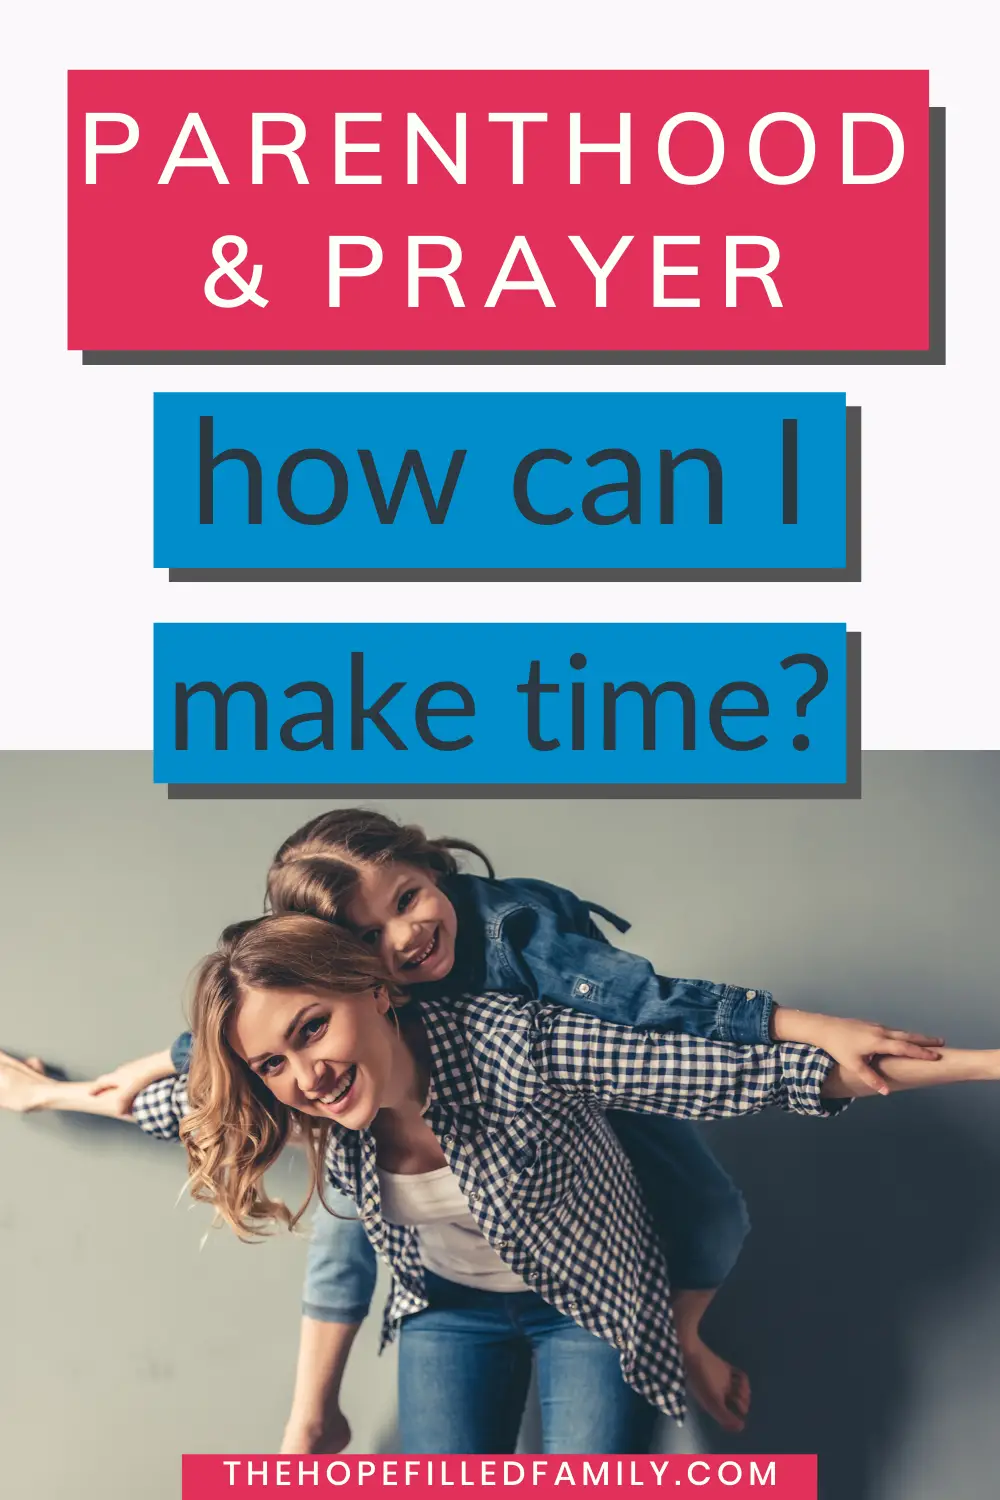 How can I make time for prayer as a busy parent? This article shares some 'why' and 'how' ideas.